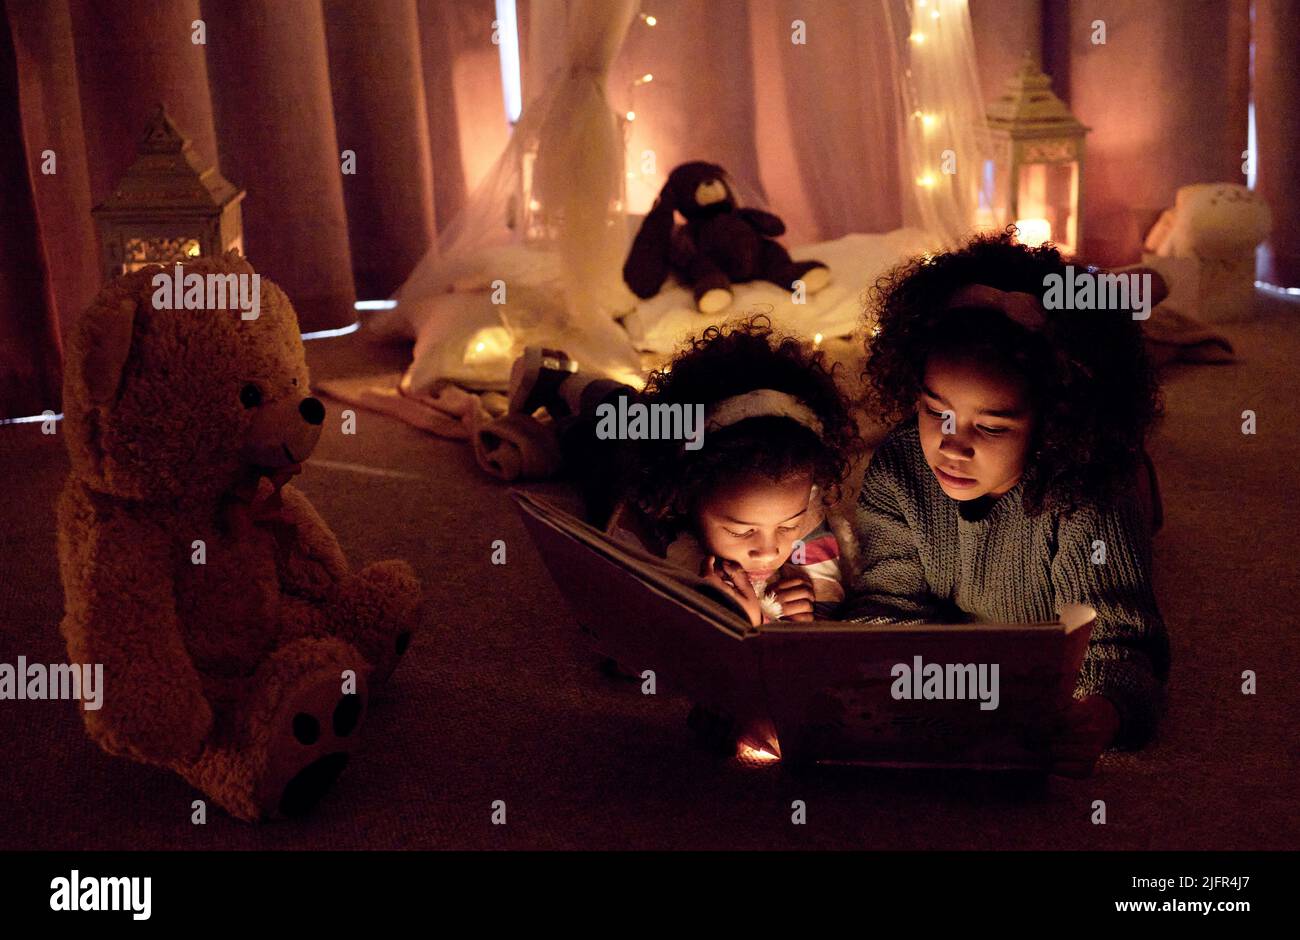 Open your mind, open a book. Shot of two adorable little girls reading a book together in a room at night. Stock Photo